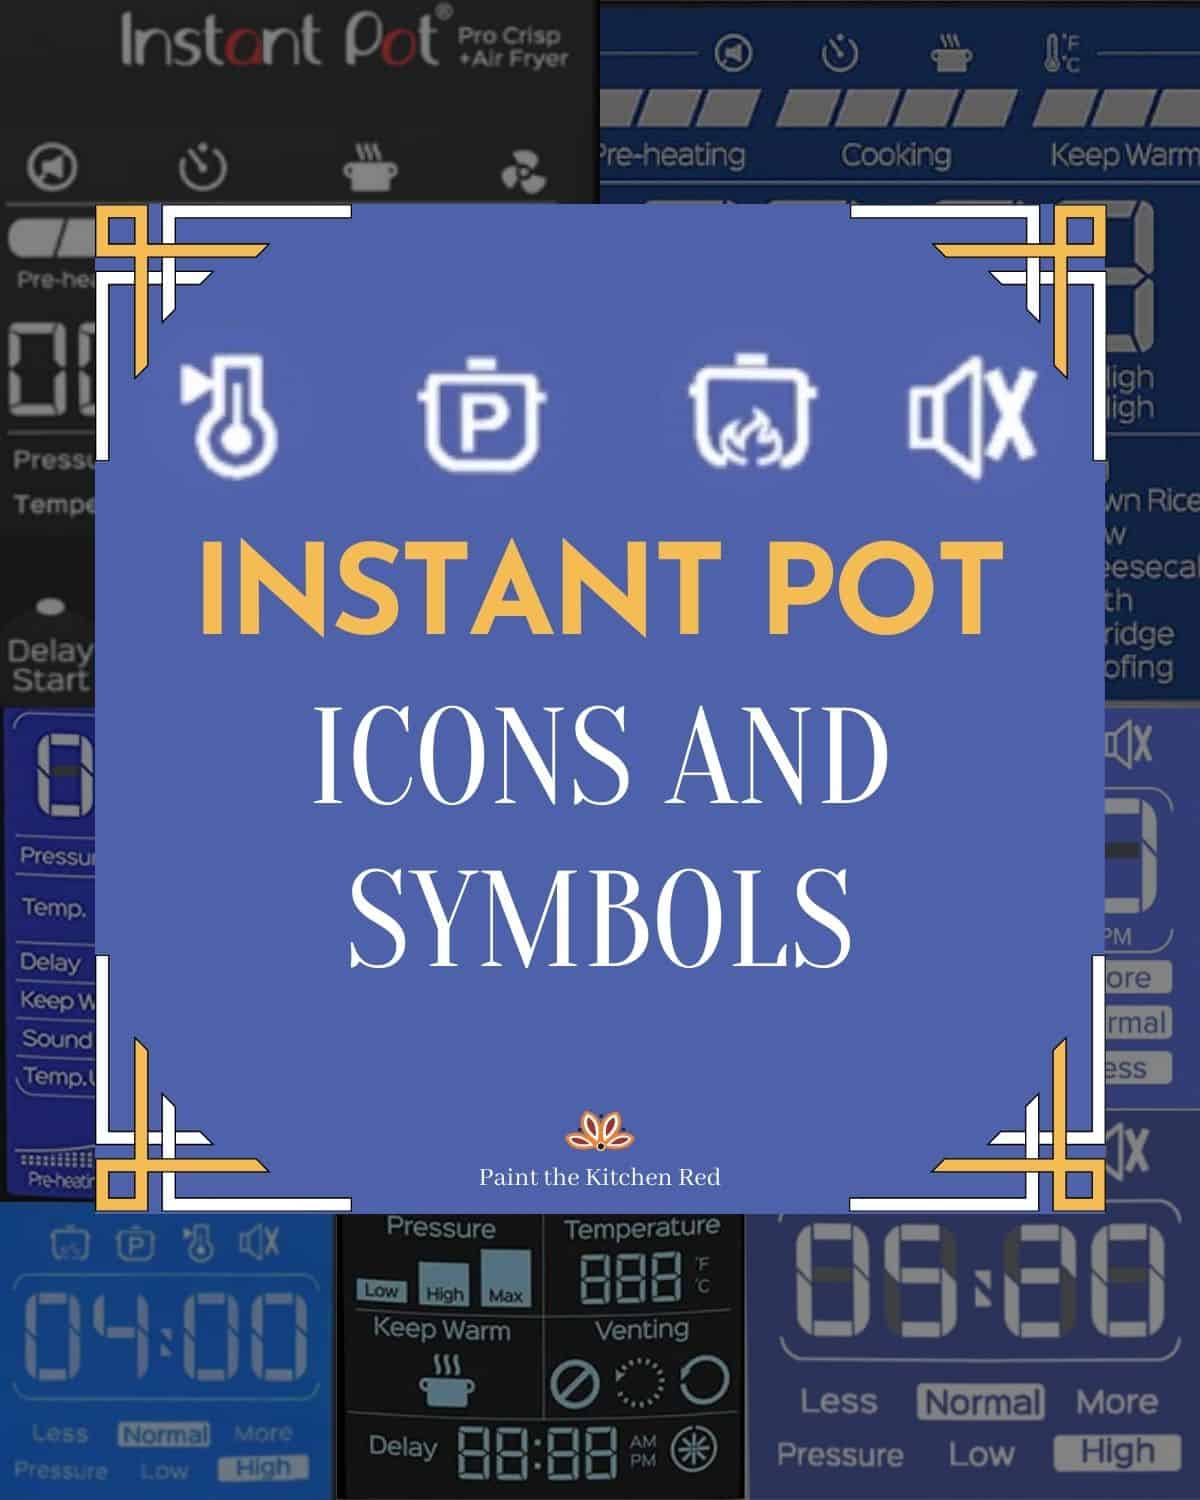 Instant pot symbols and icons